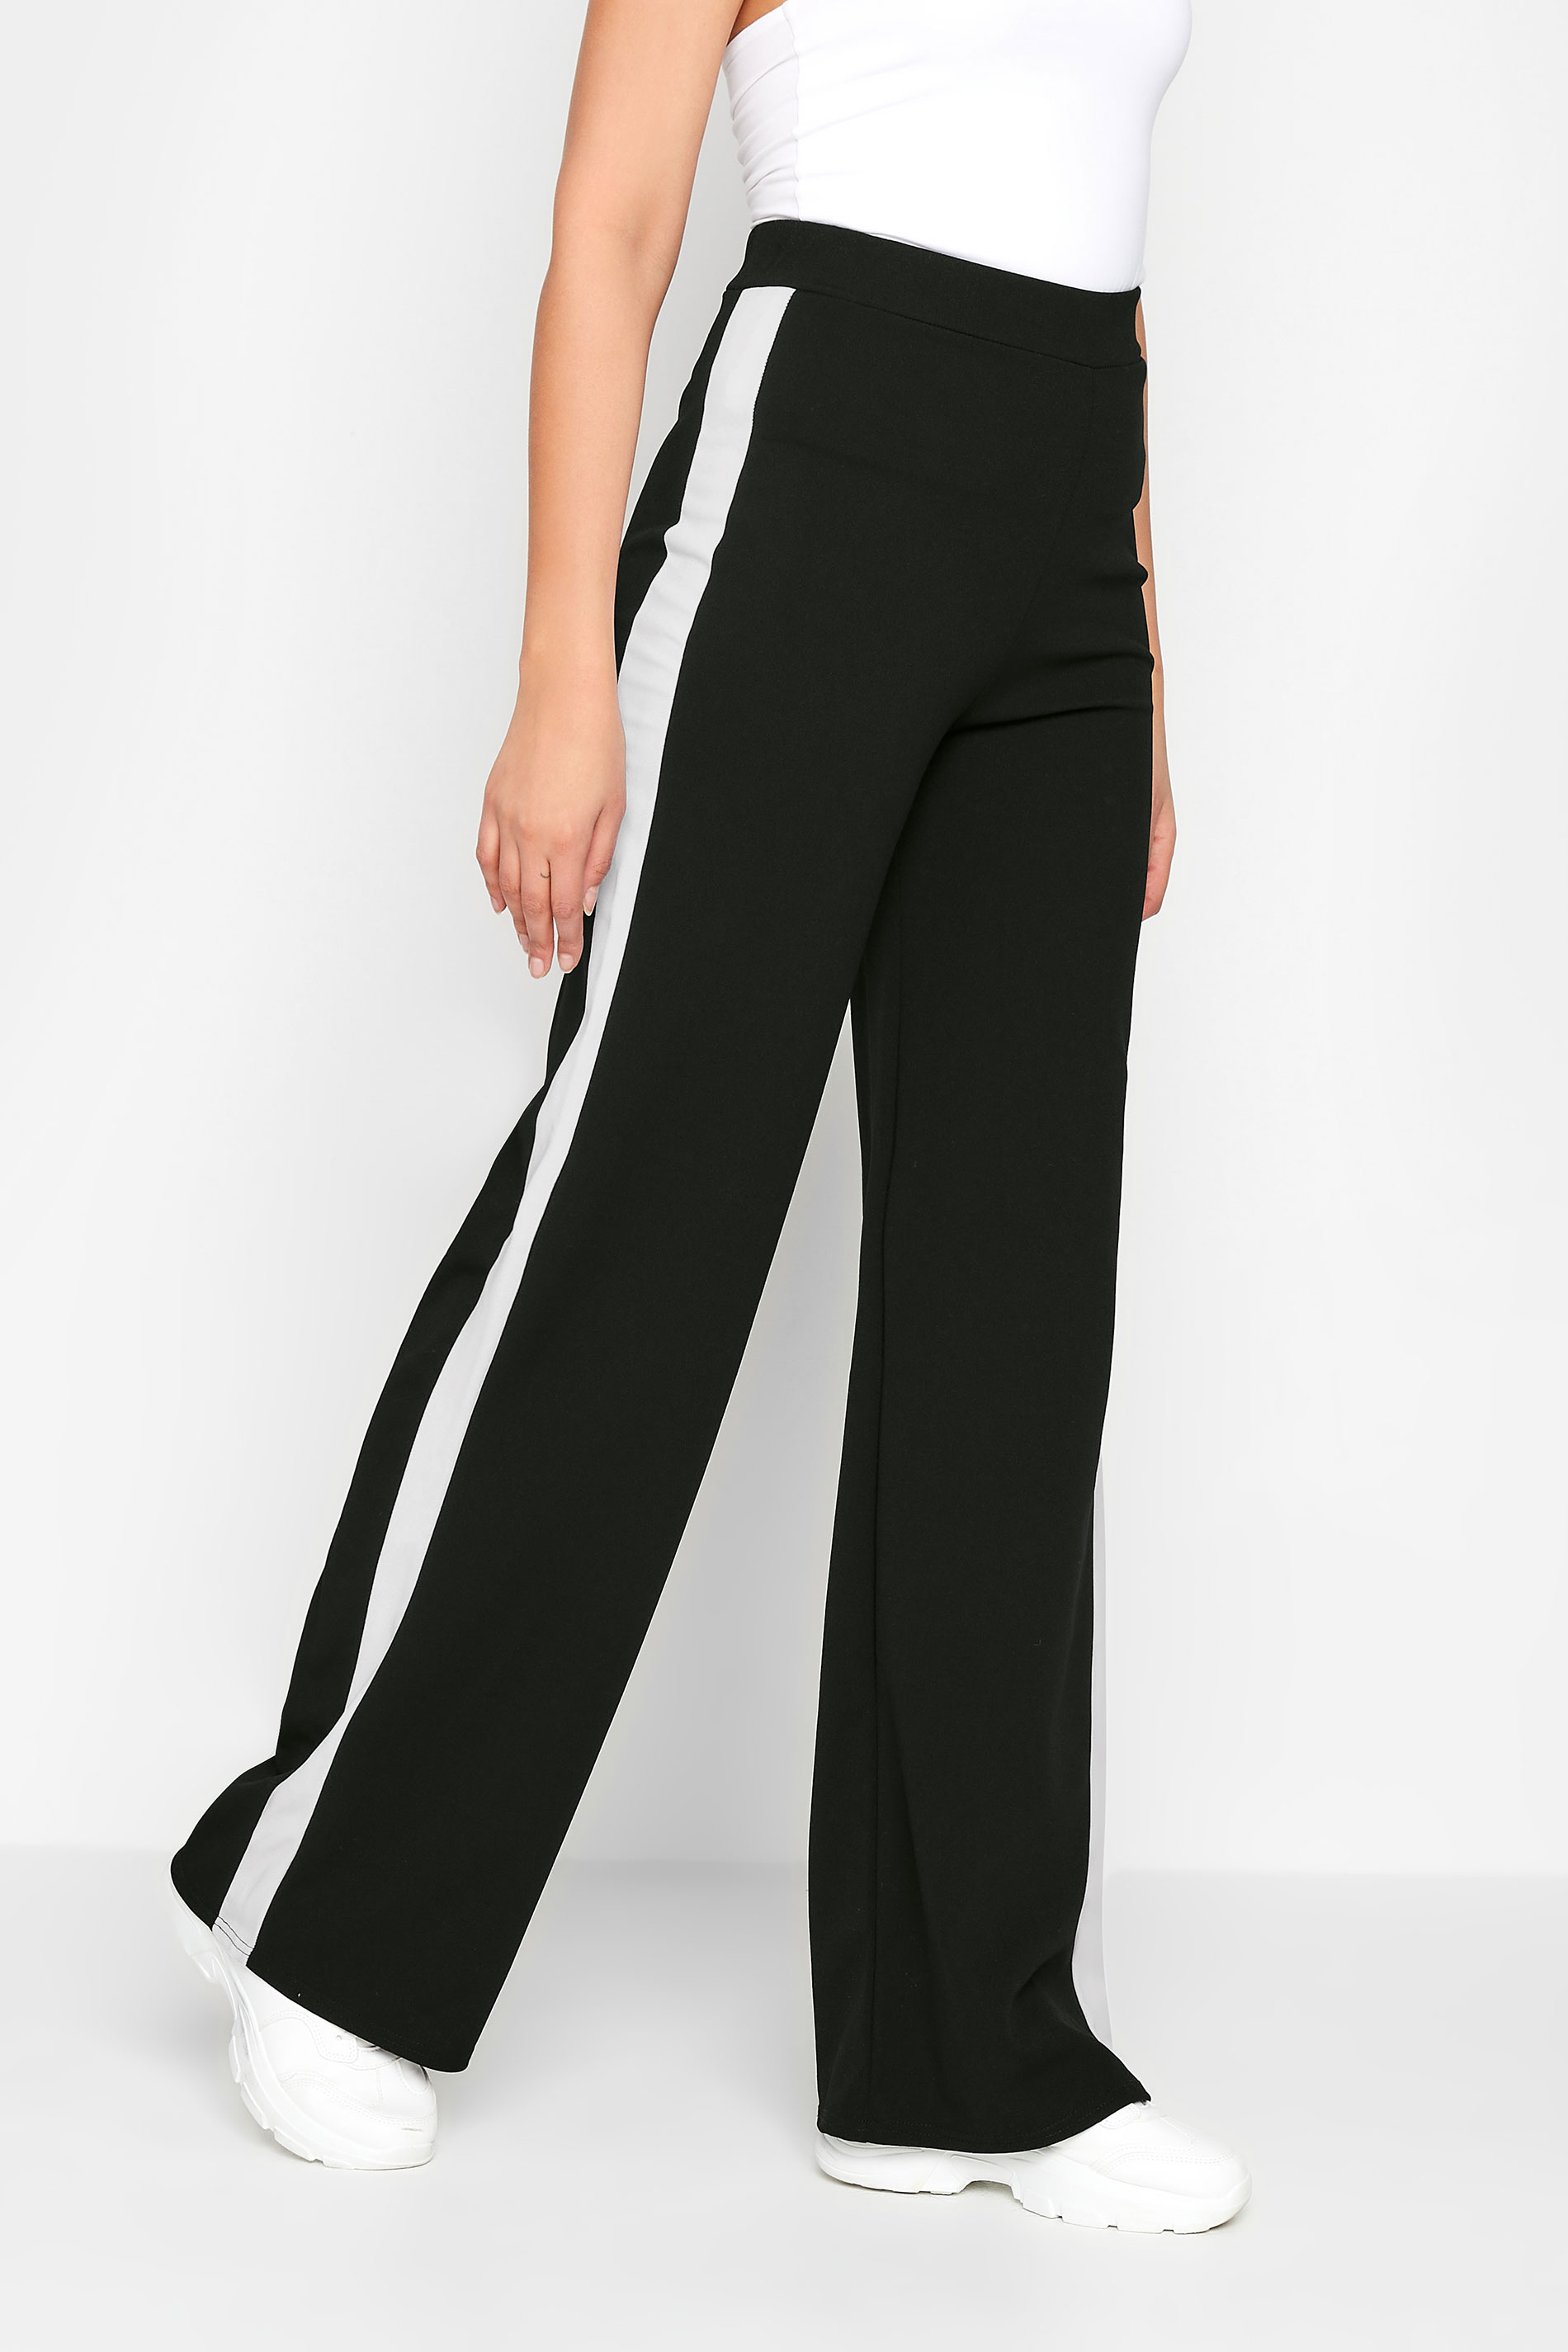 Details more than 127 long striped trousers